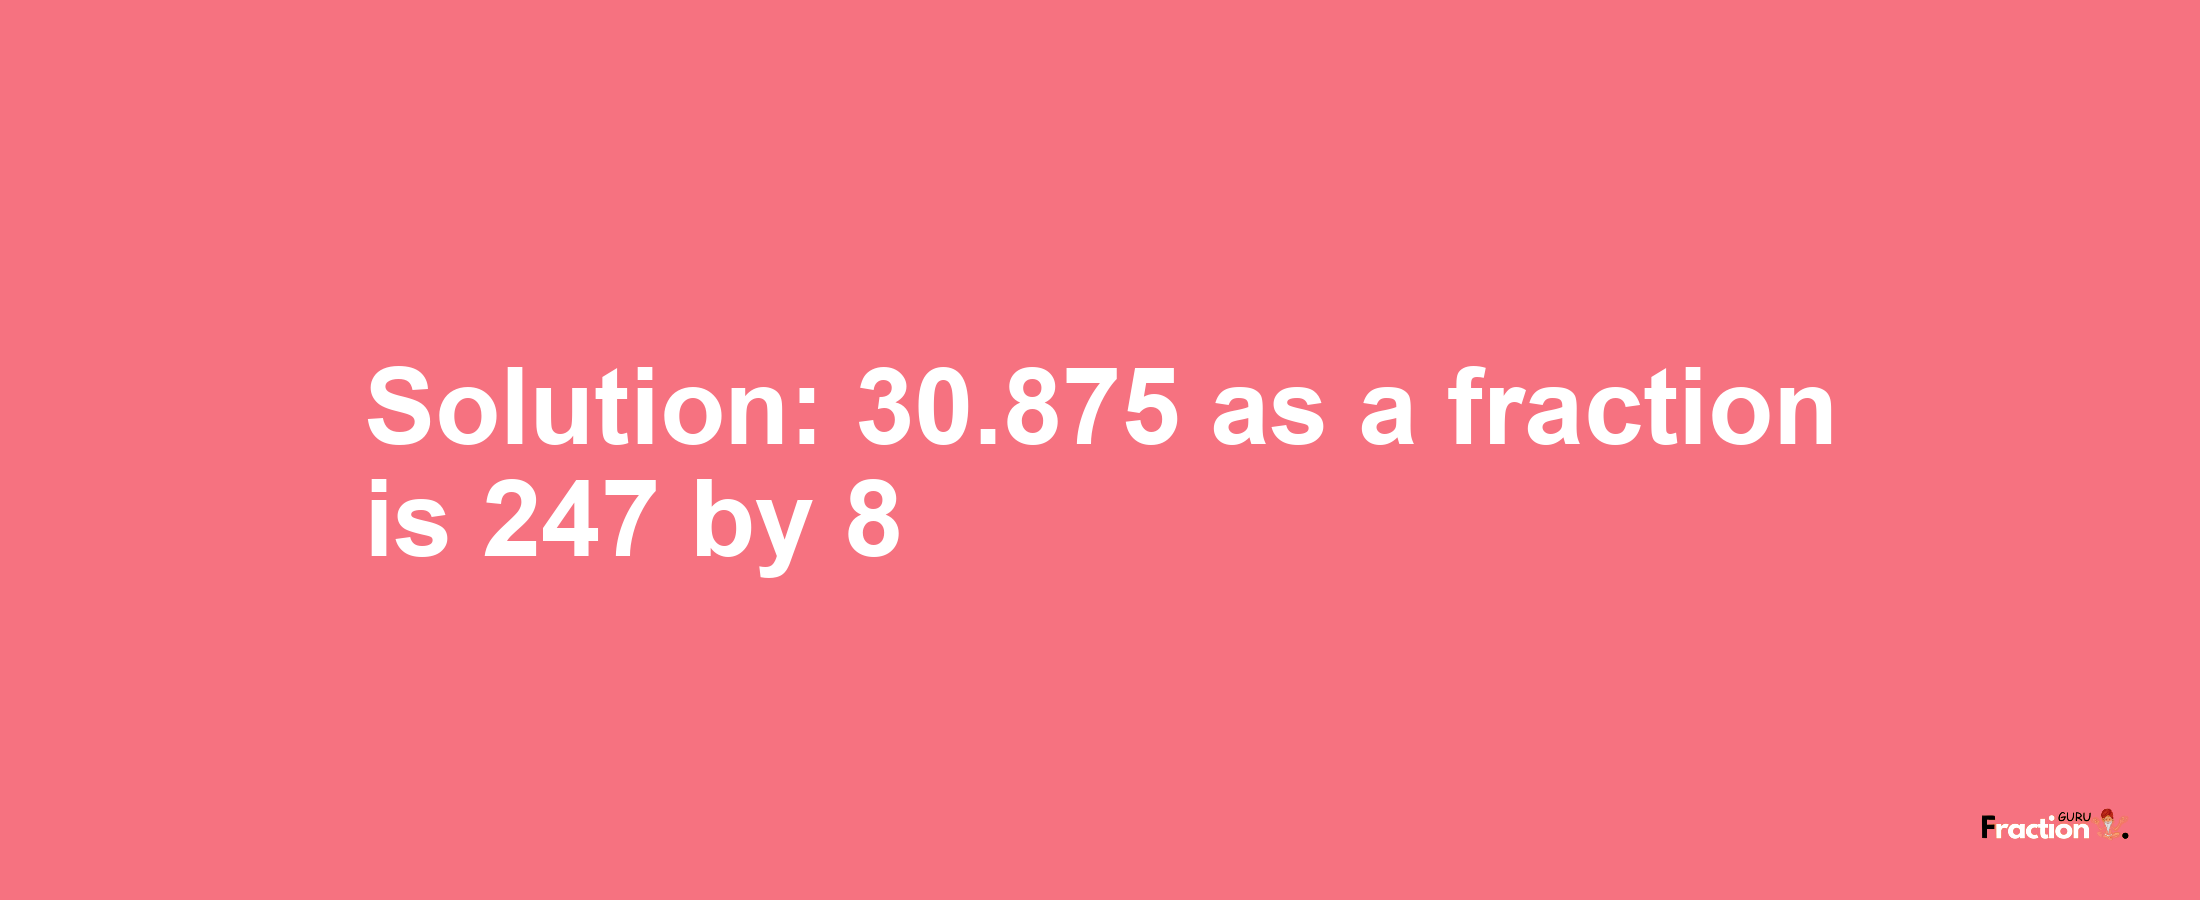 Solution:30.875 as a fraction is 247/8